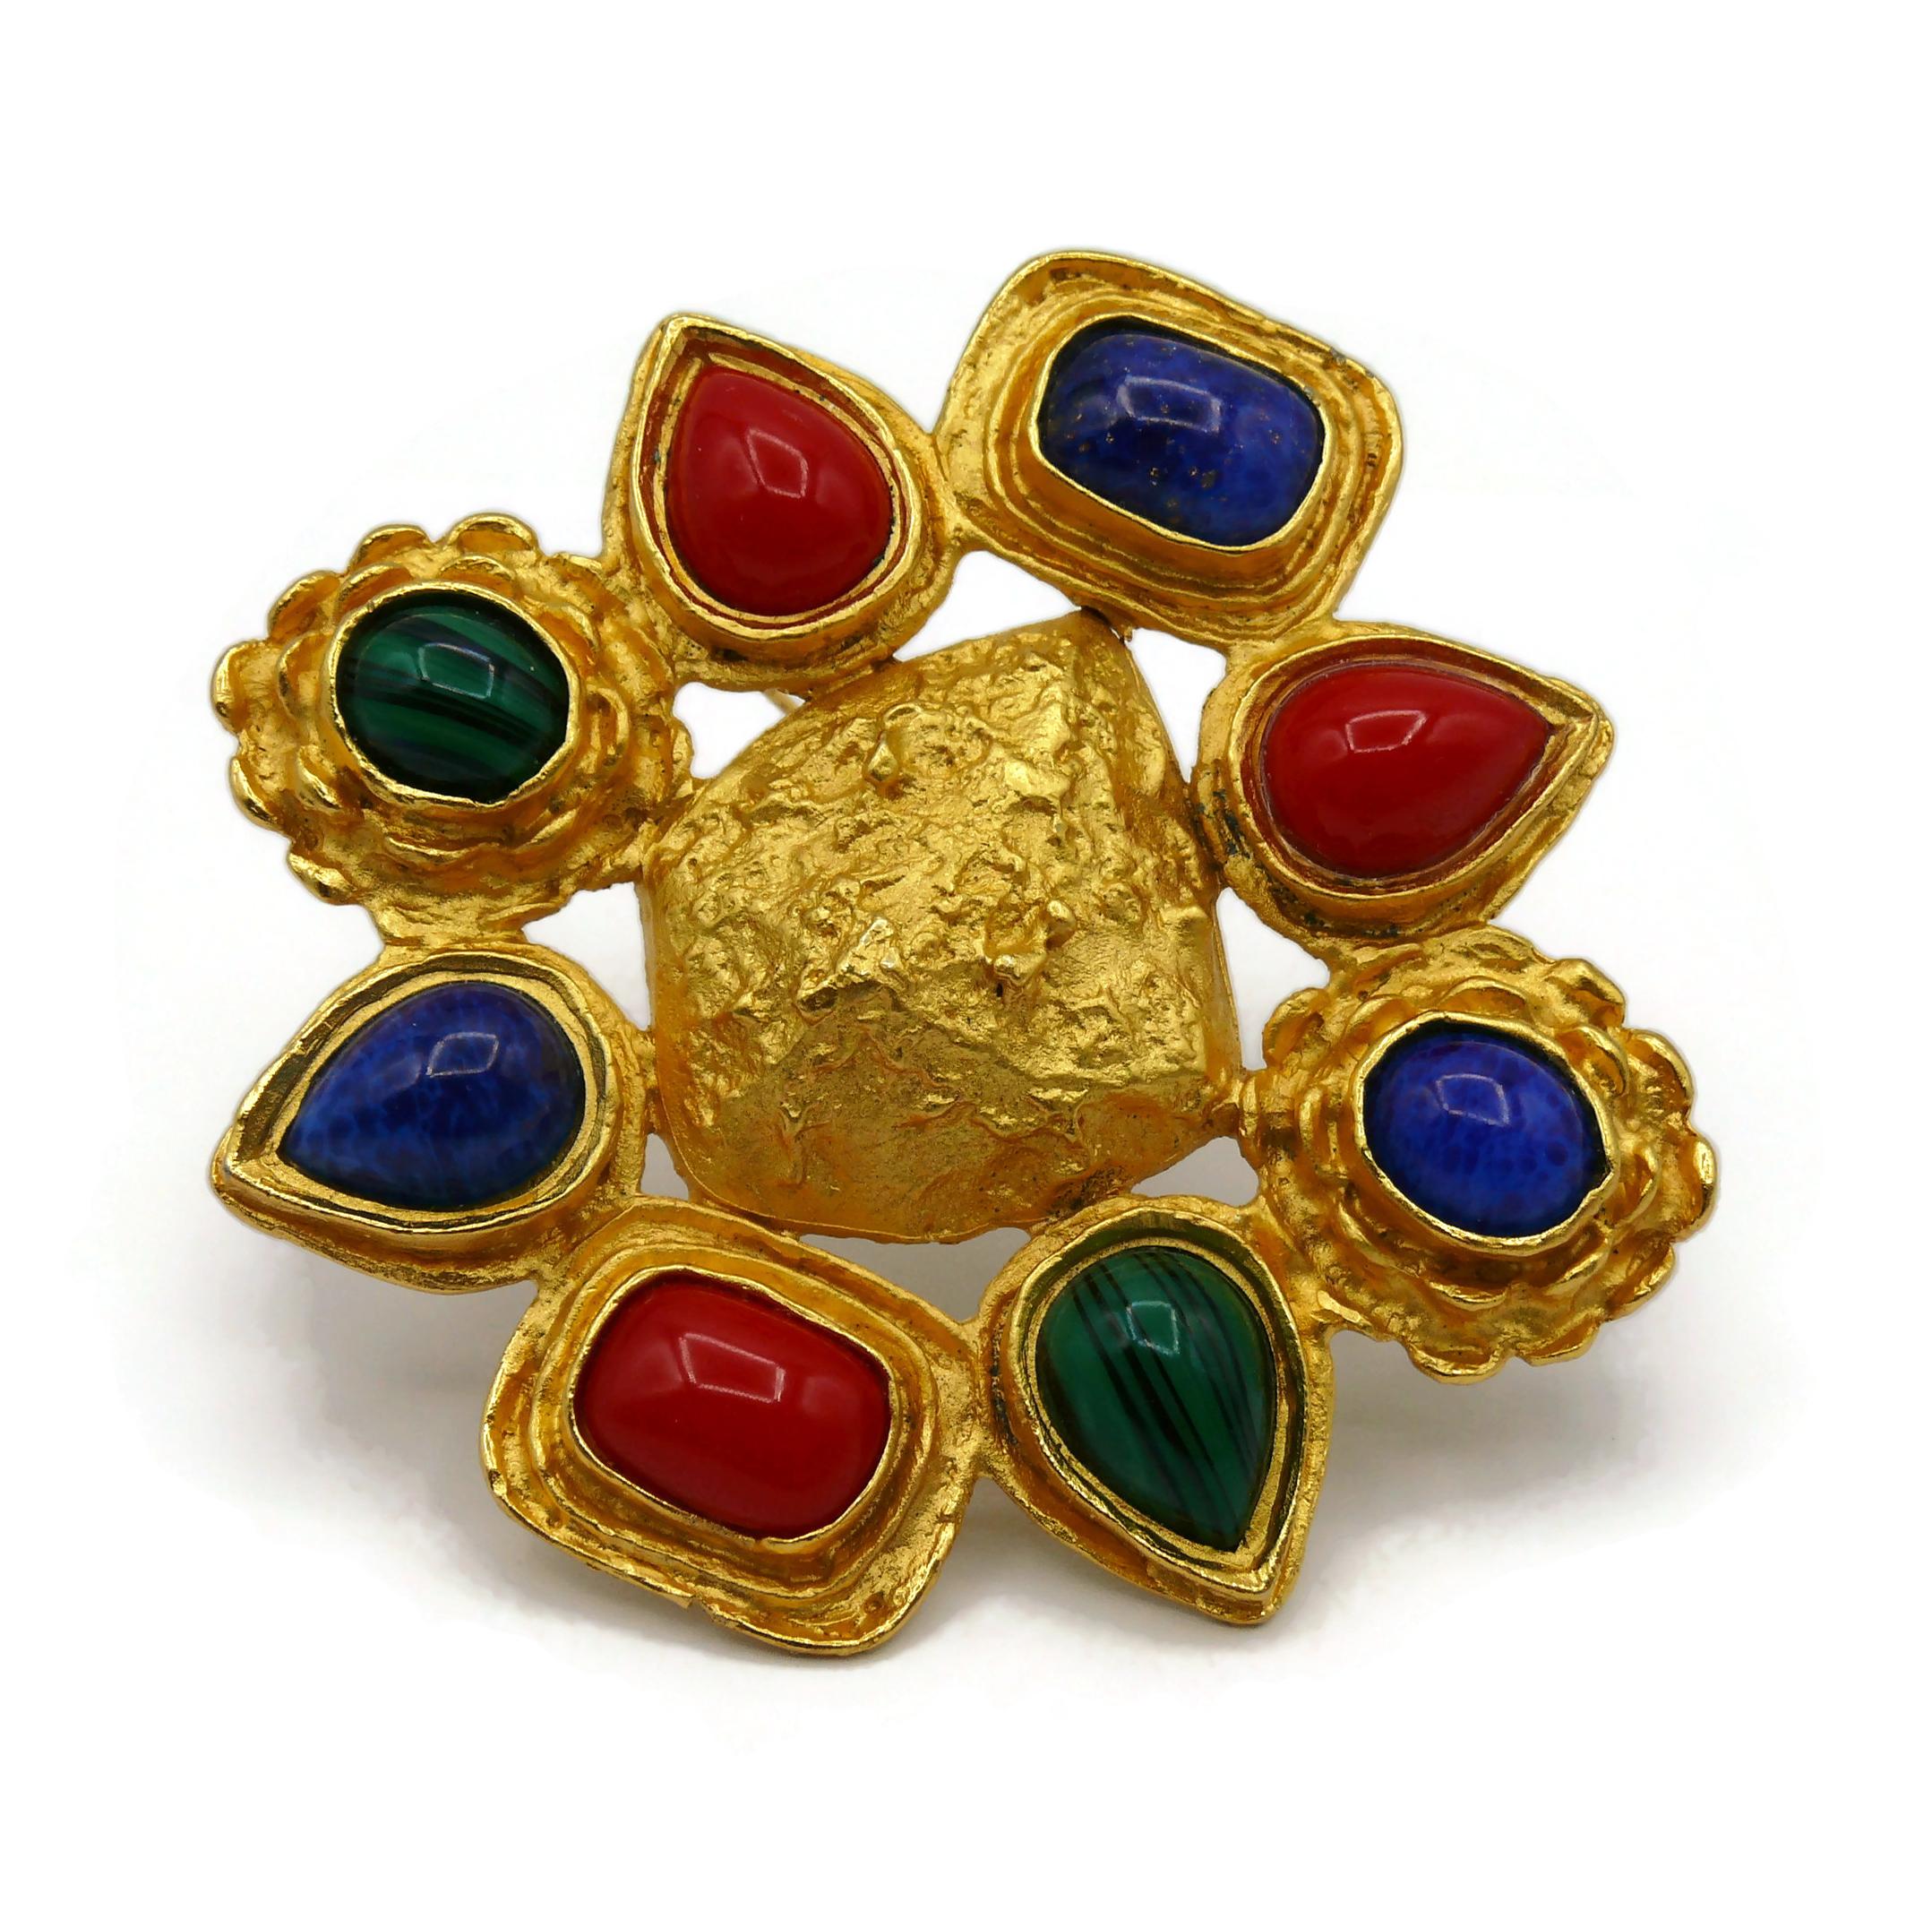 CHRISTIAN LACROIX Vintage Massive Gold Tone and Faux Gemstones Brooch For Sale 1